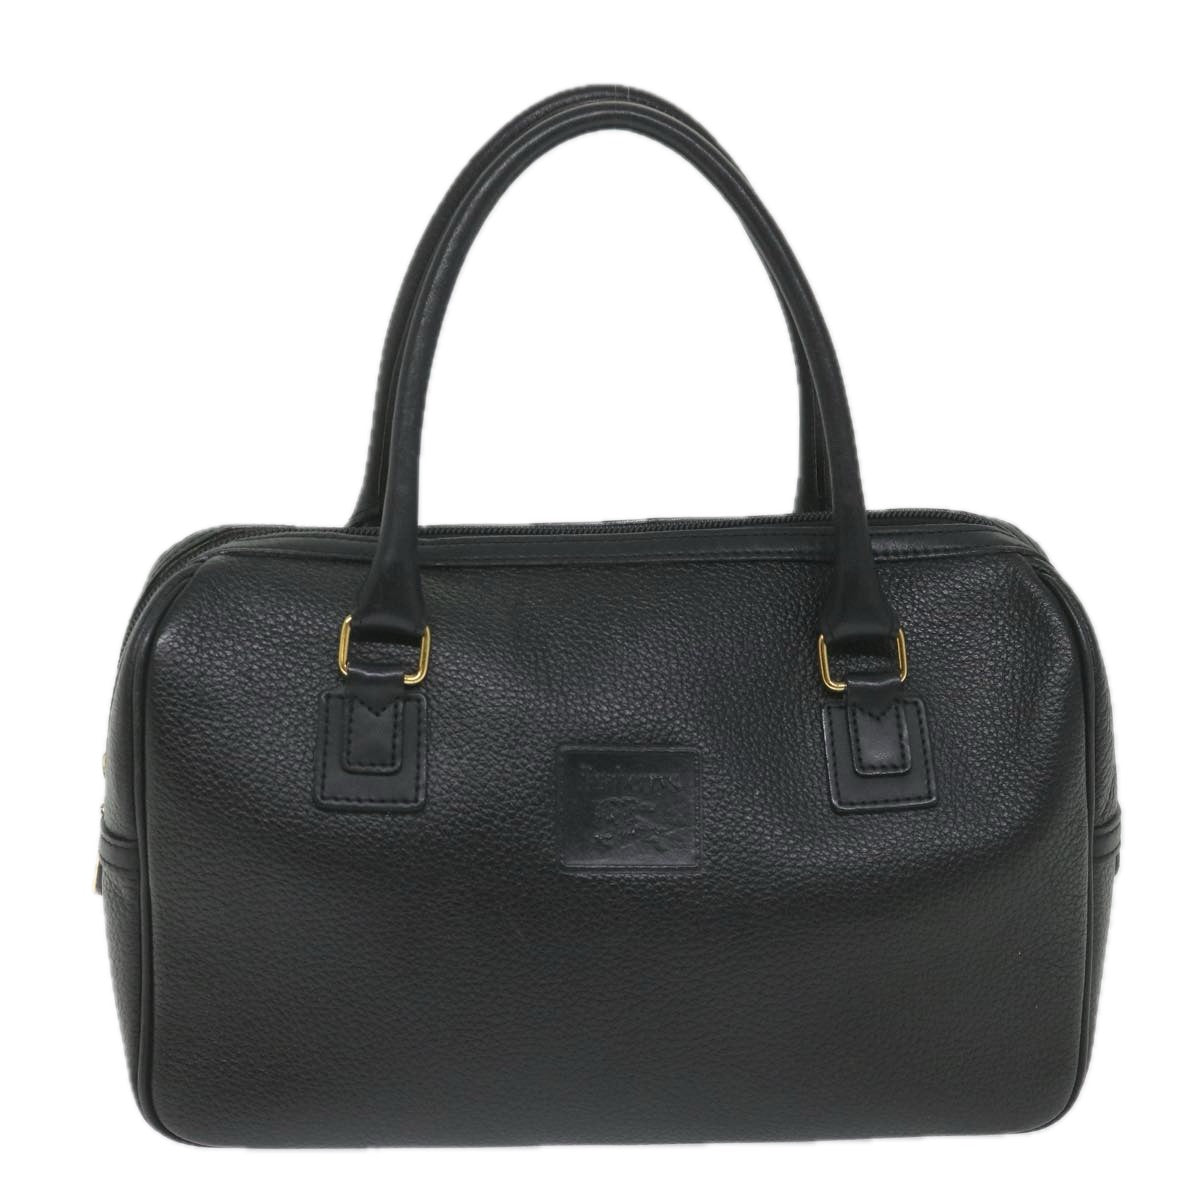 Burberrys Hand Bag Leather Black Auth bs9531